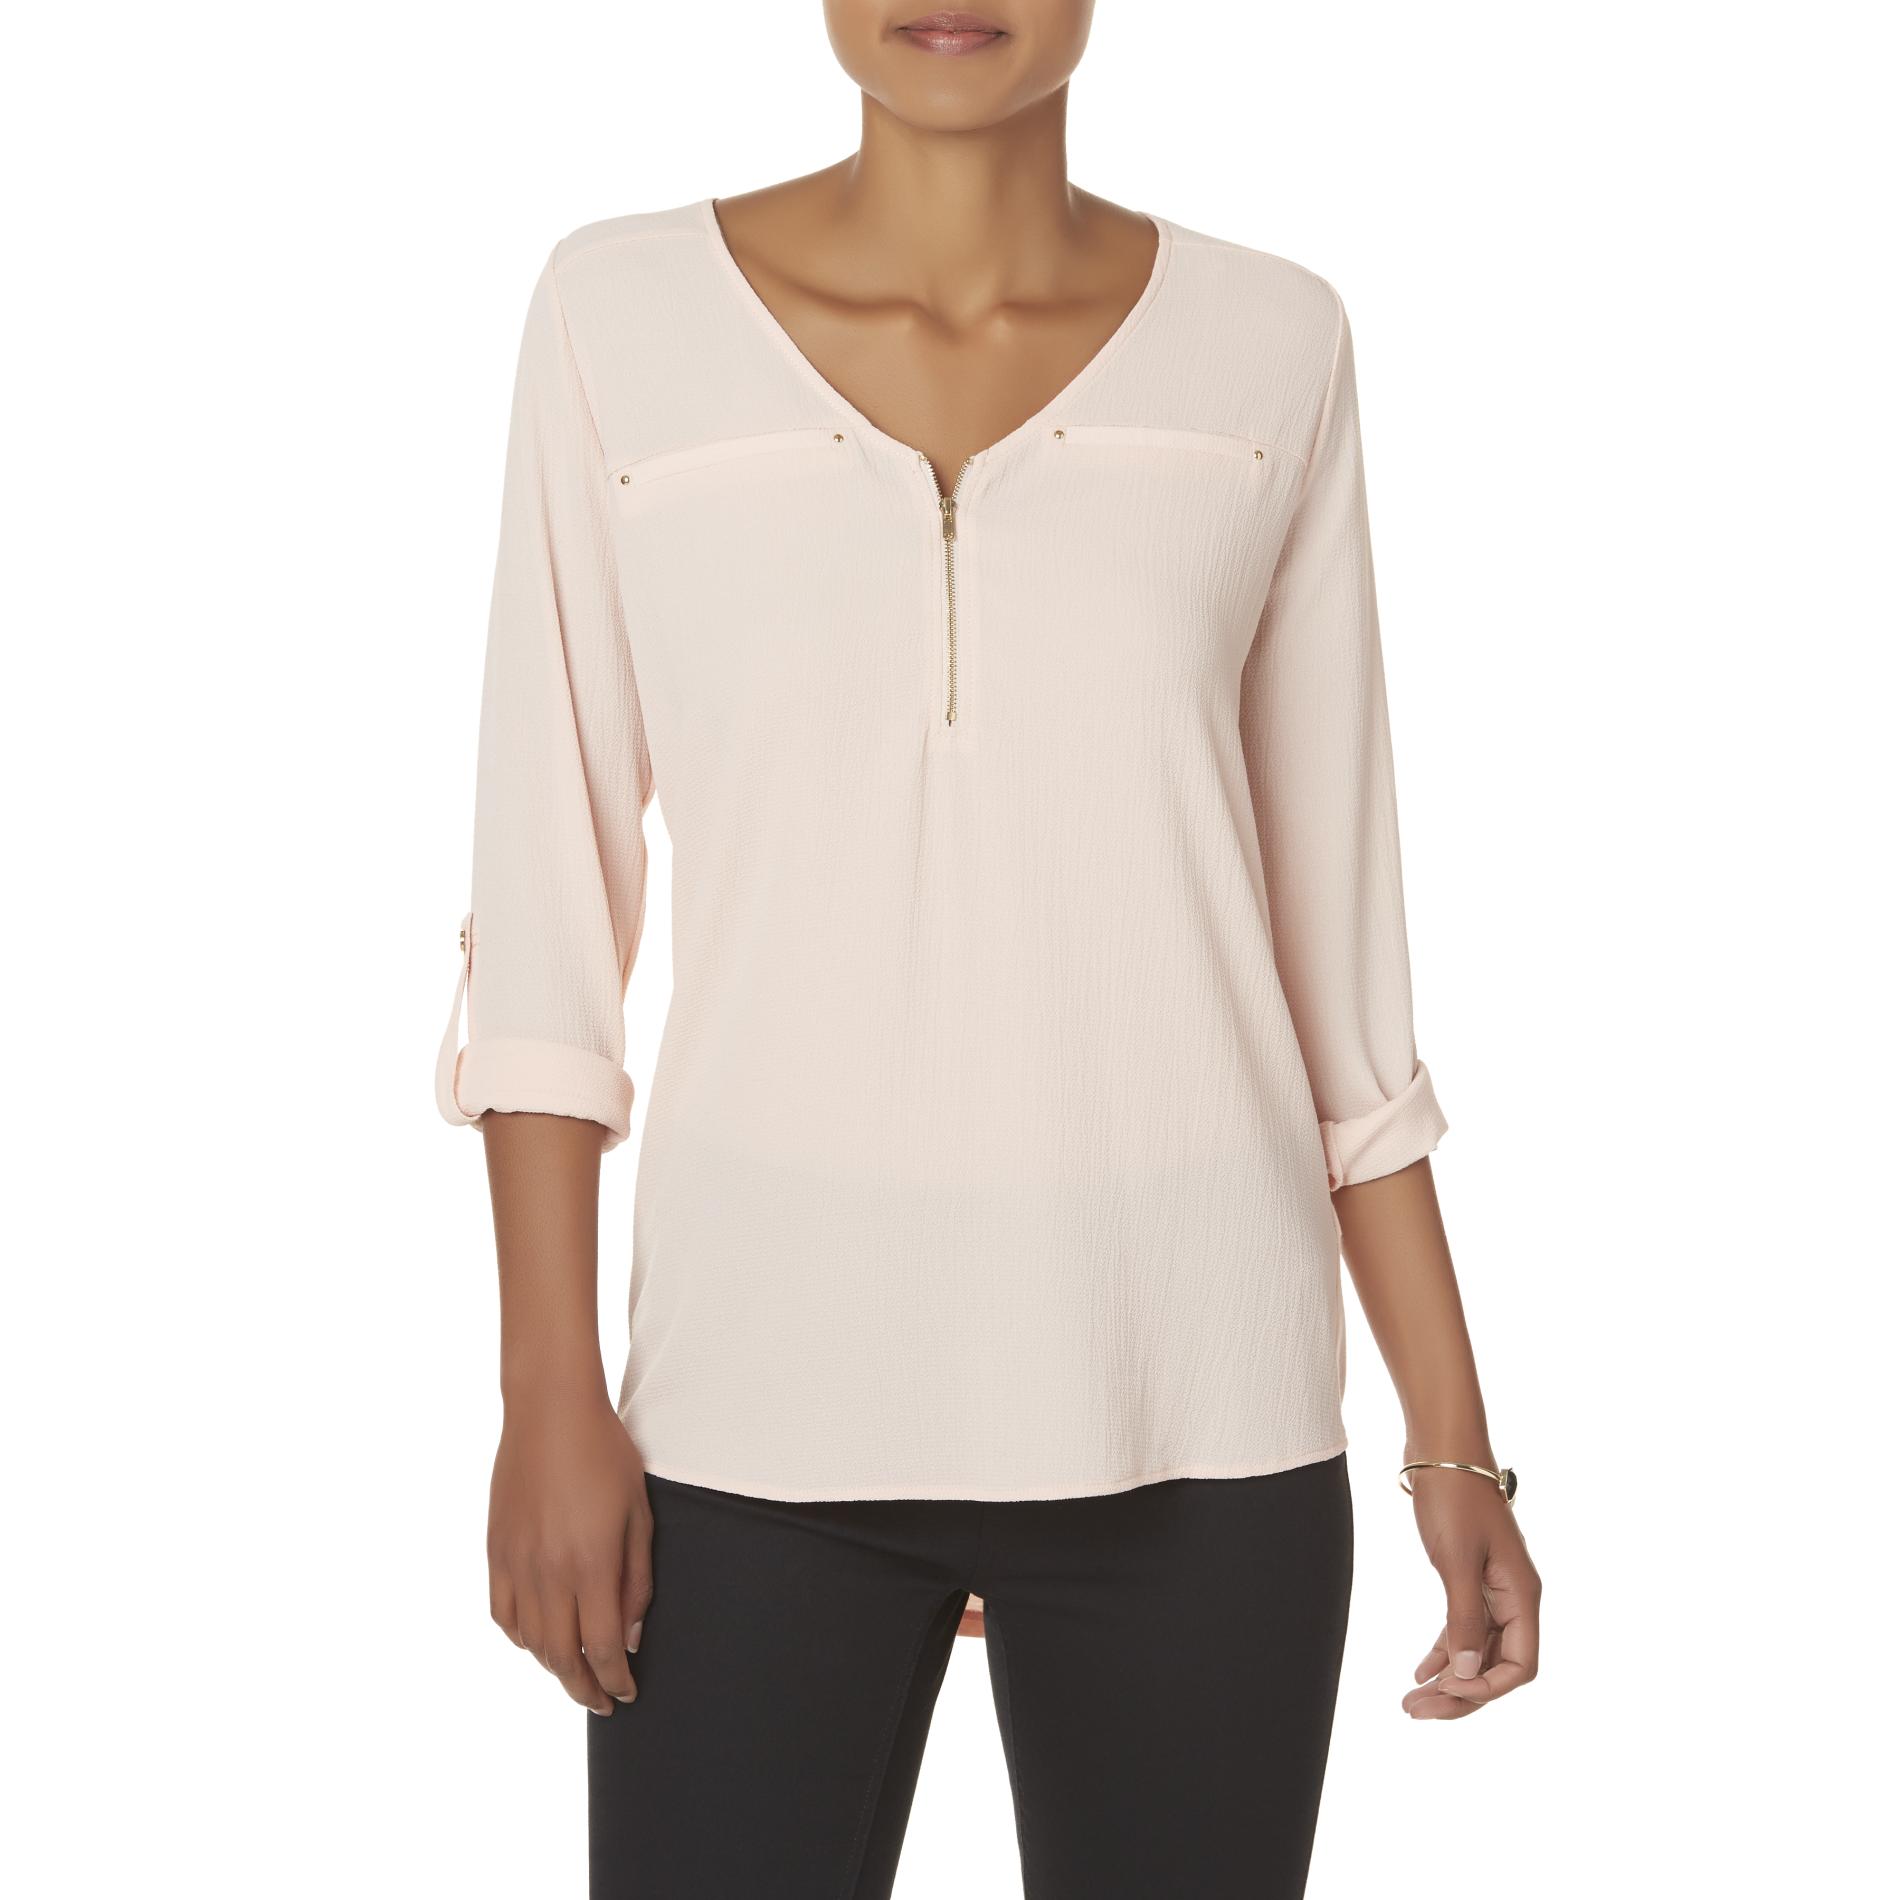 Simply Styled Women's Mixed Media Blouse